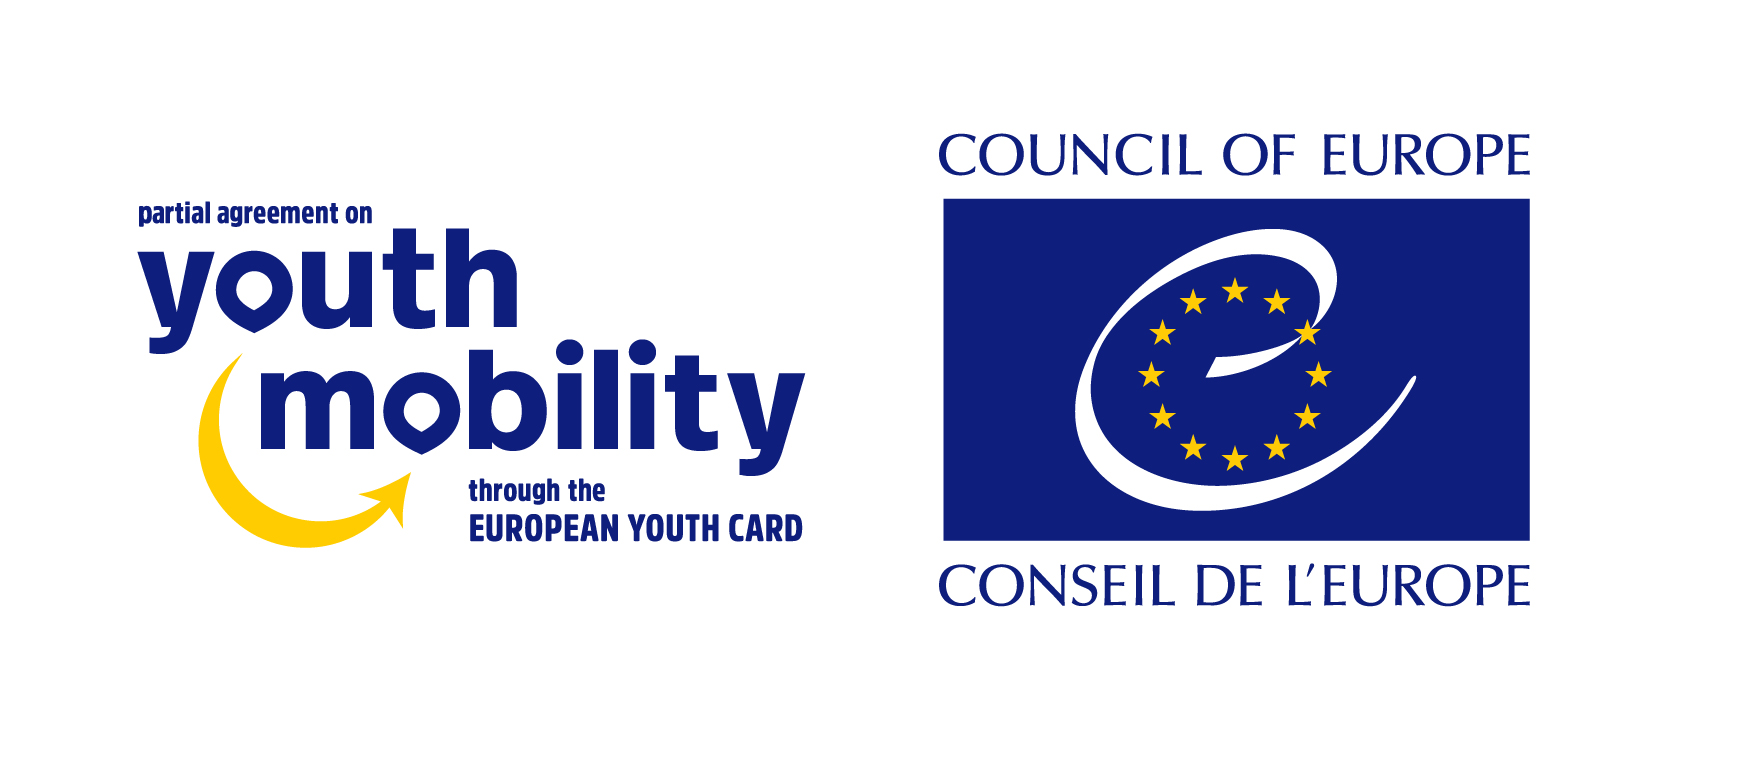 North Macedonia joins the Partial Agreement on youth mobility through the youth card! 